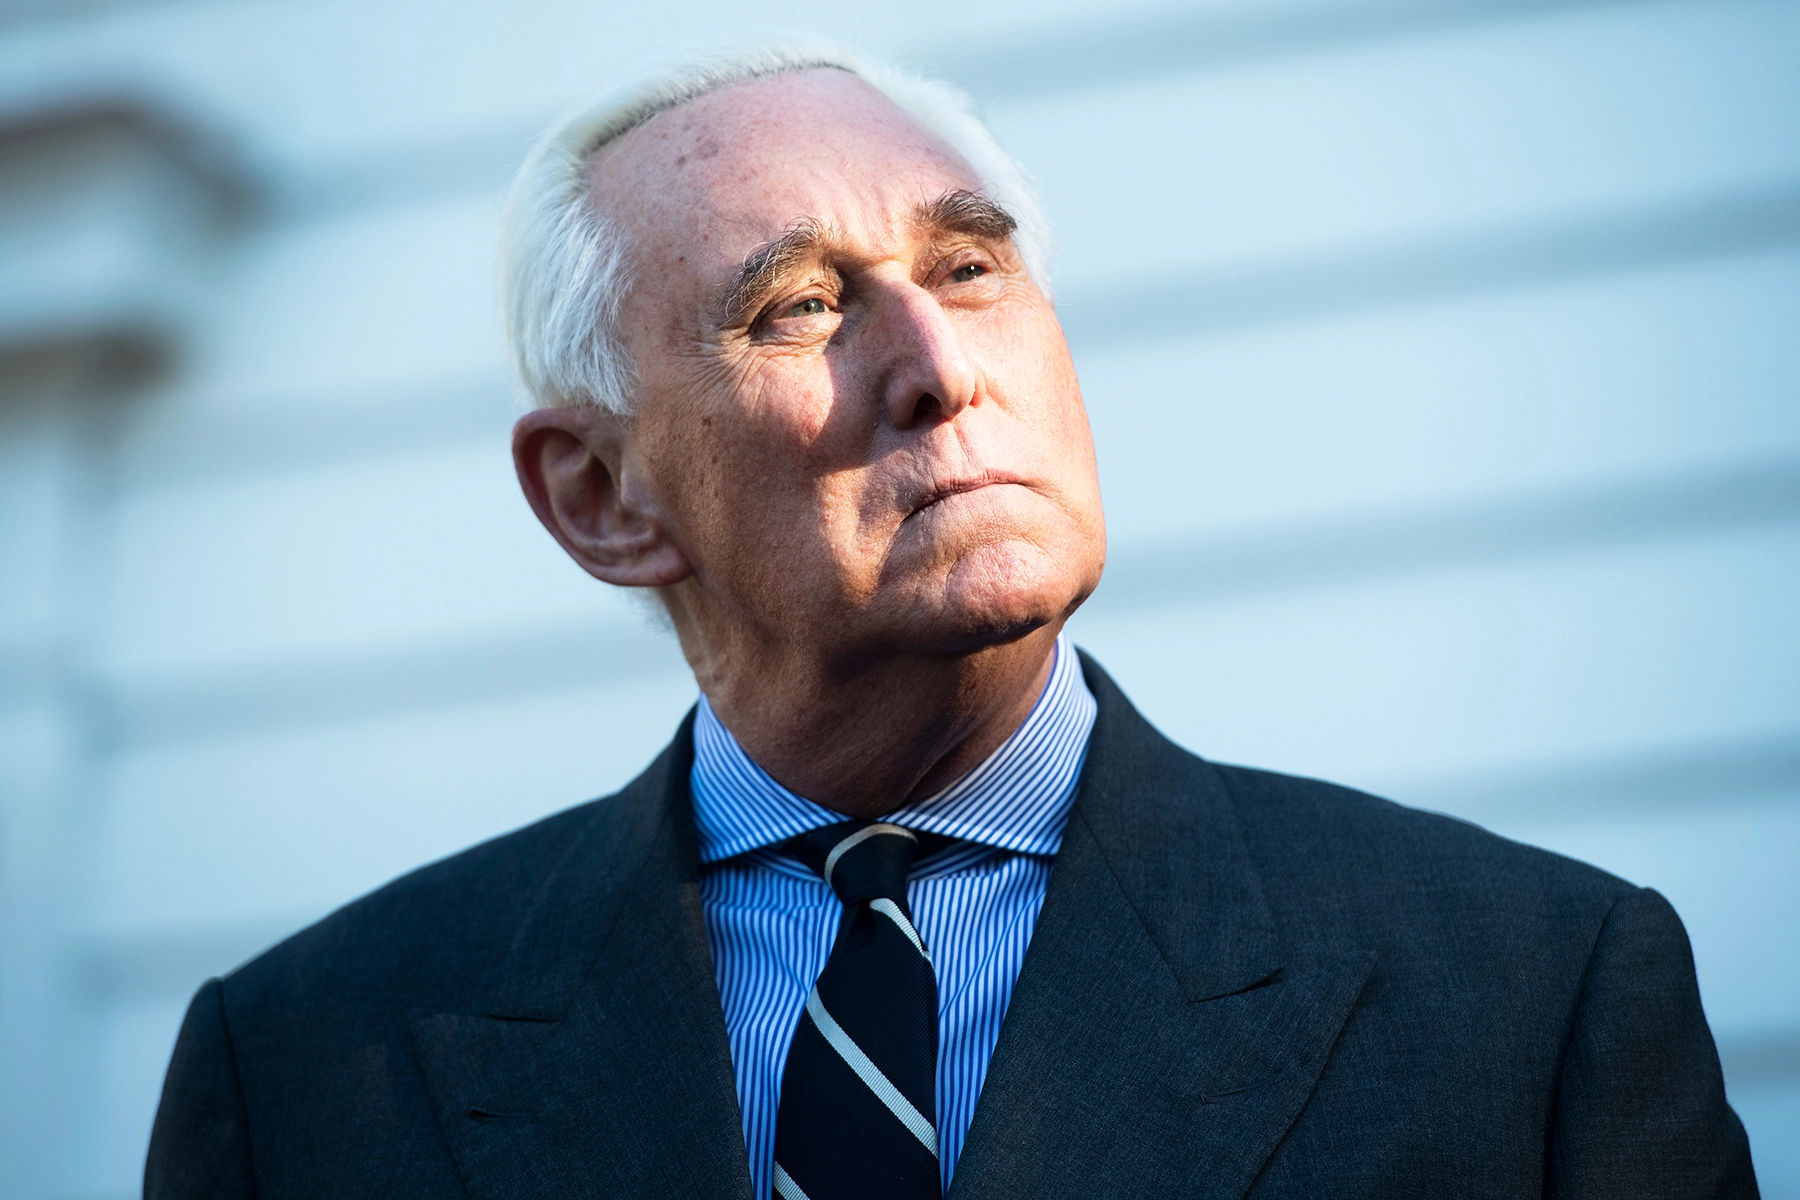 Who is Roger Stone?